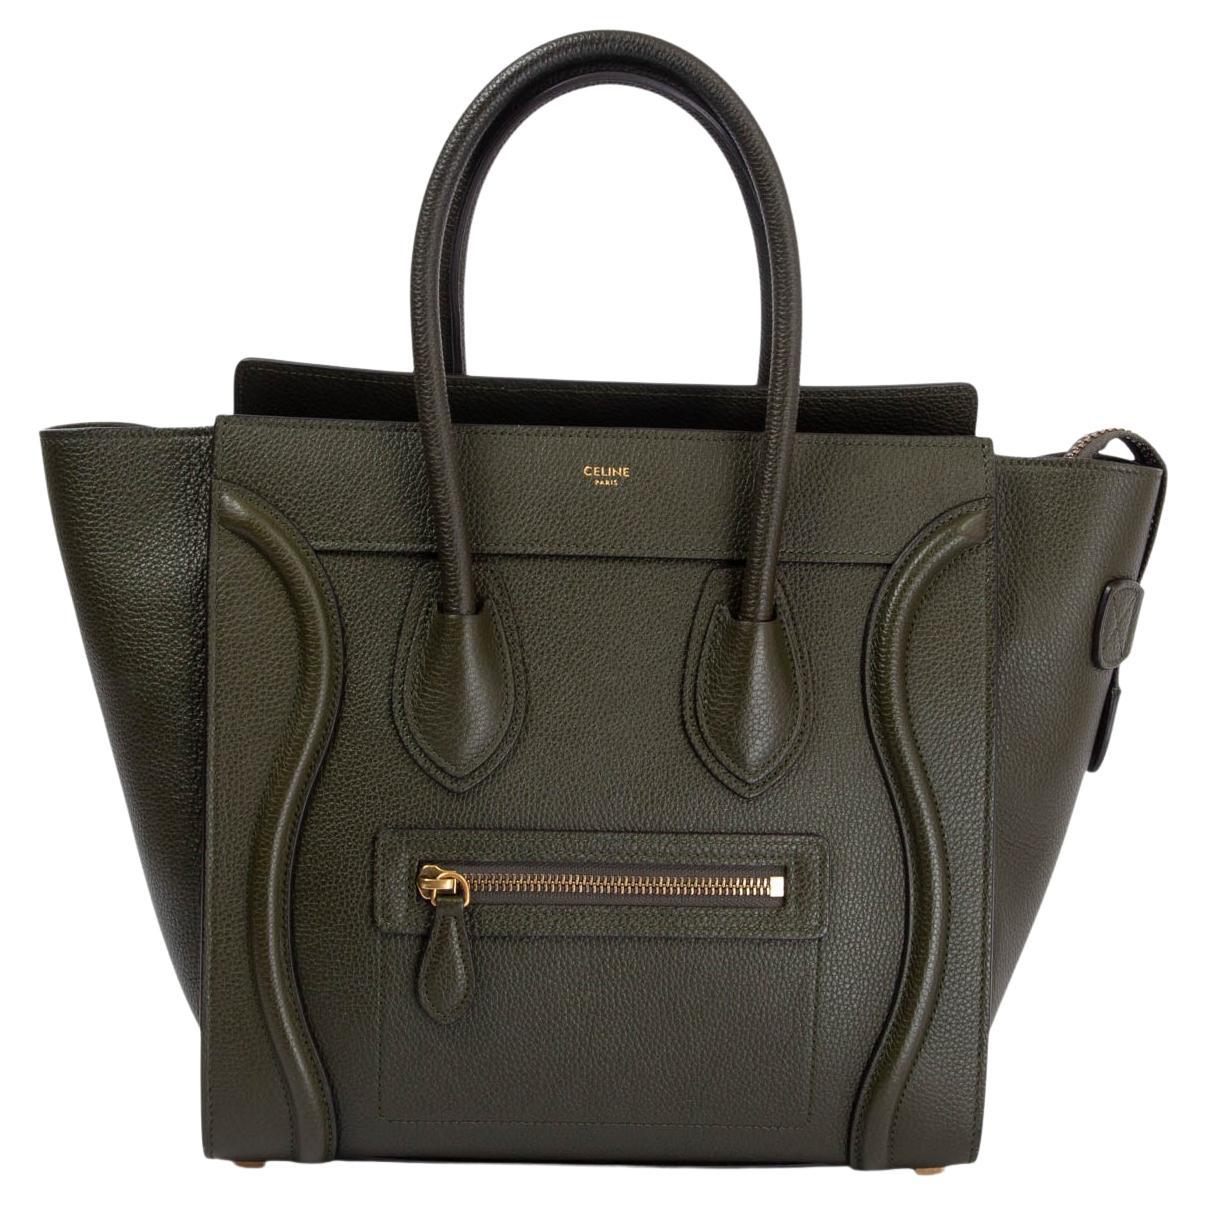 CELINE olive green grained leather MICRO LUGGAGE Tote Bag